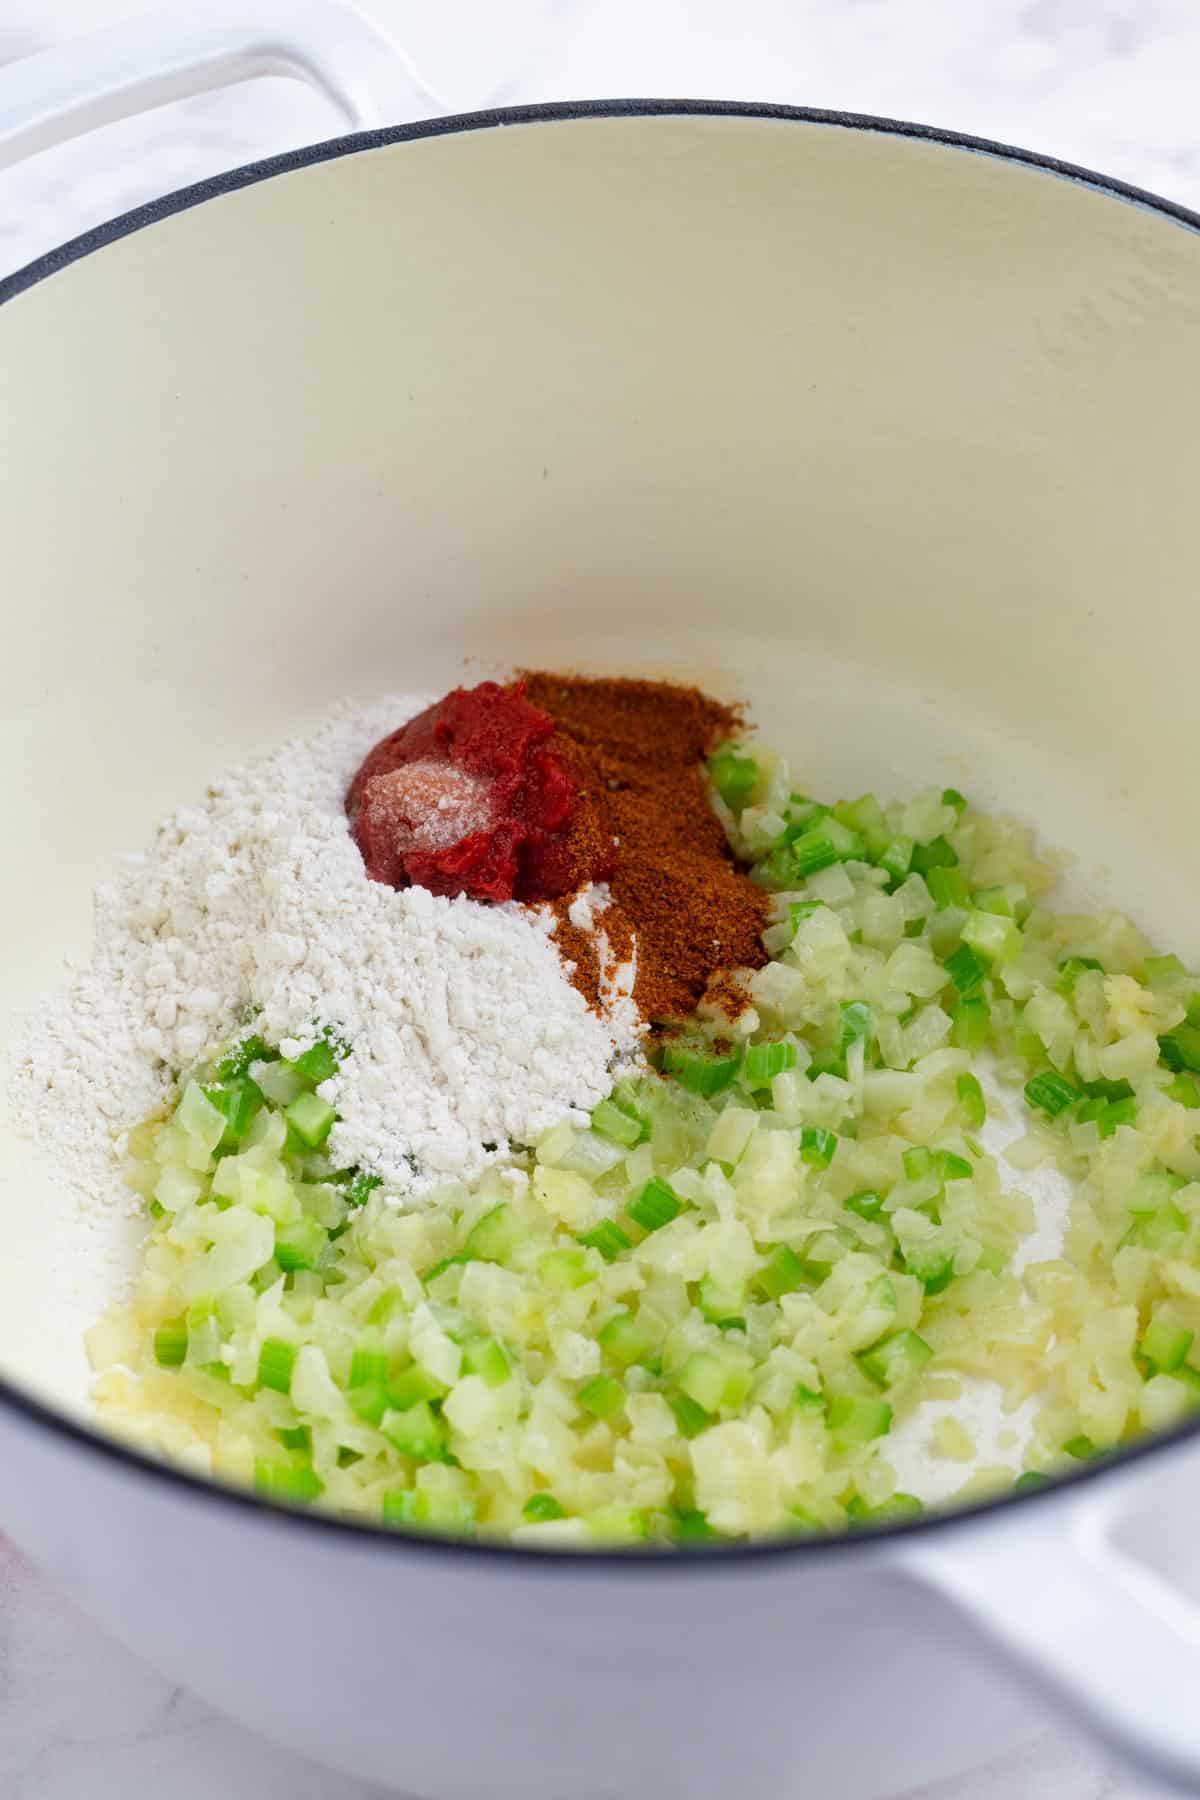 Flour, seasonings, and tomato paste is added to the onion, garlic, and celery base.